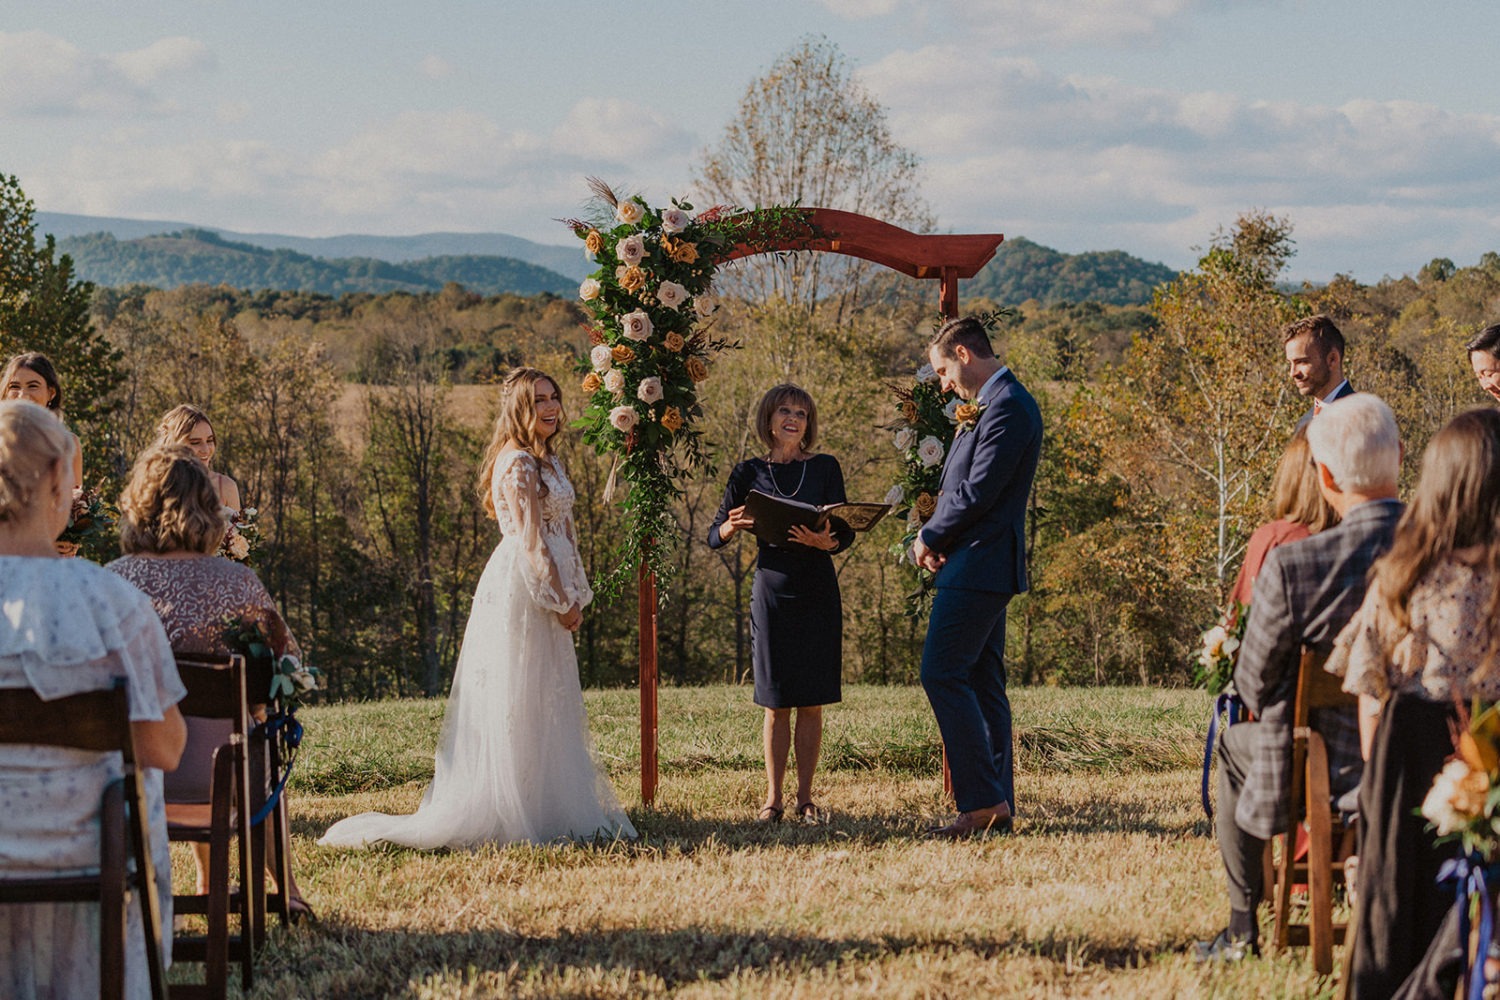 Couple laughs while exchanging vows at mountainside wedding ceremony